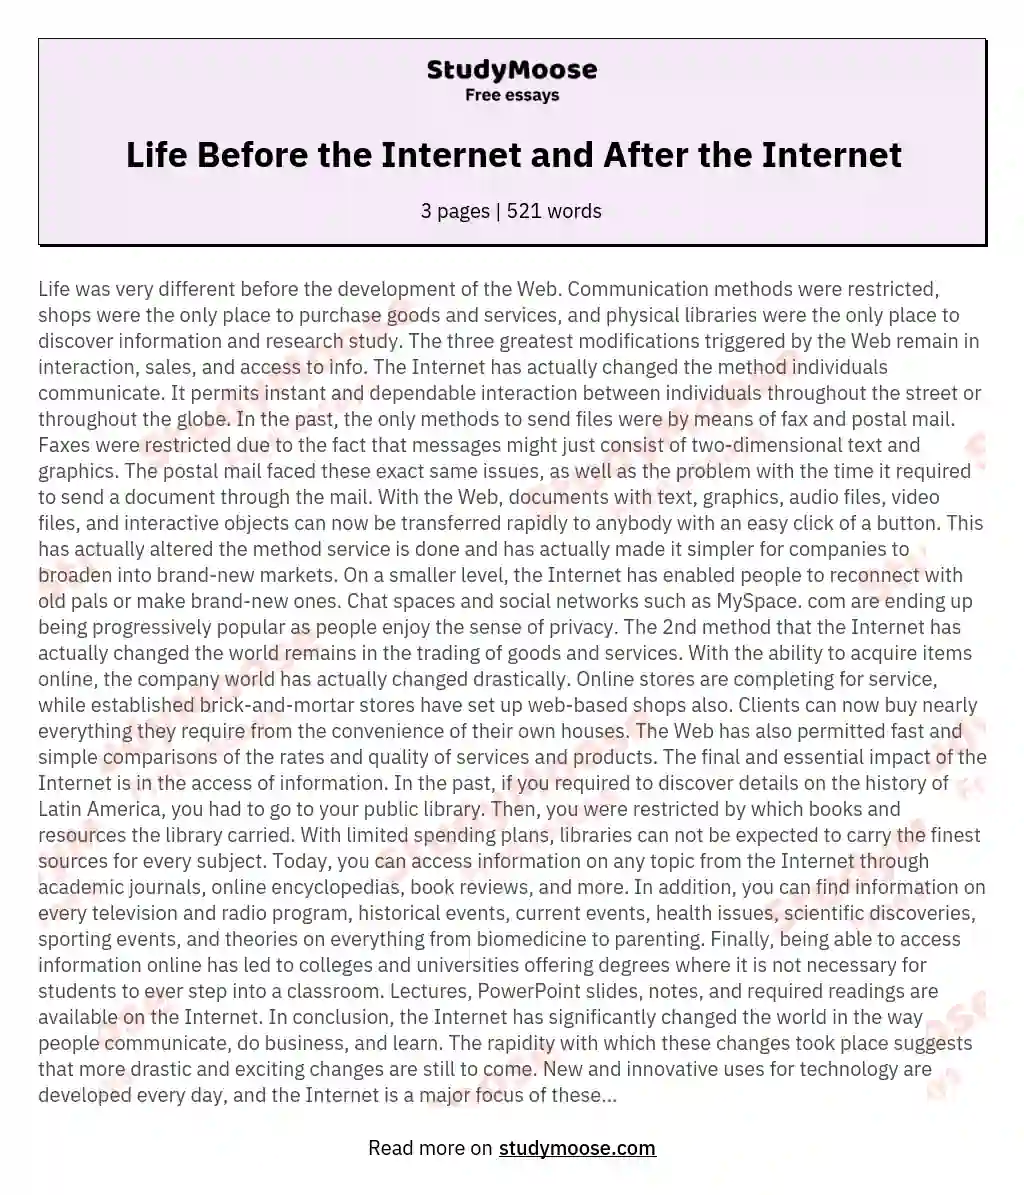 Life Before the Internet and After the Internet